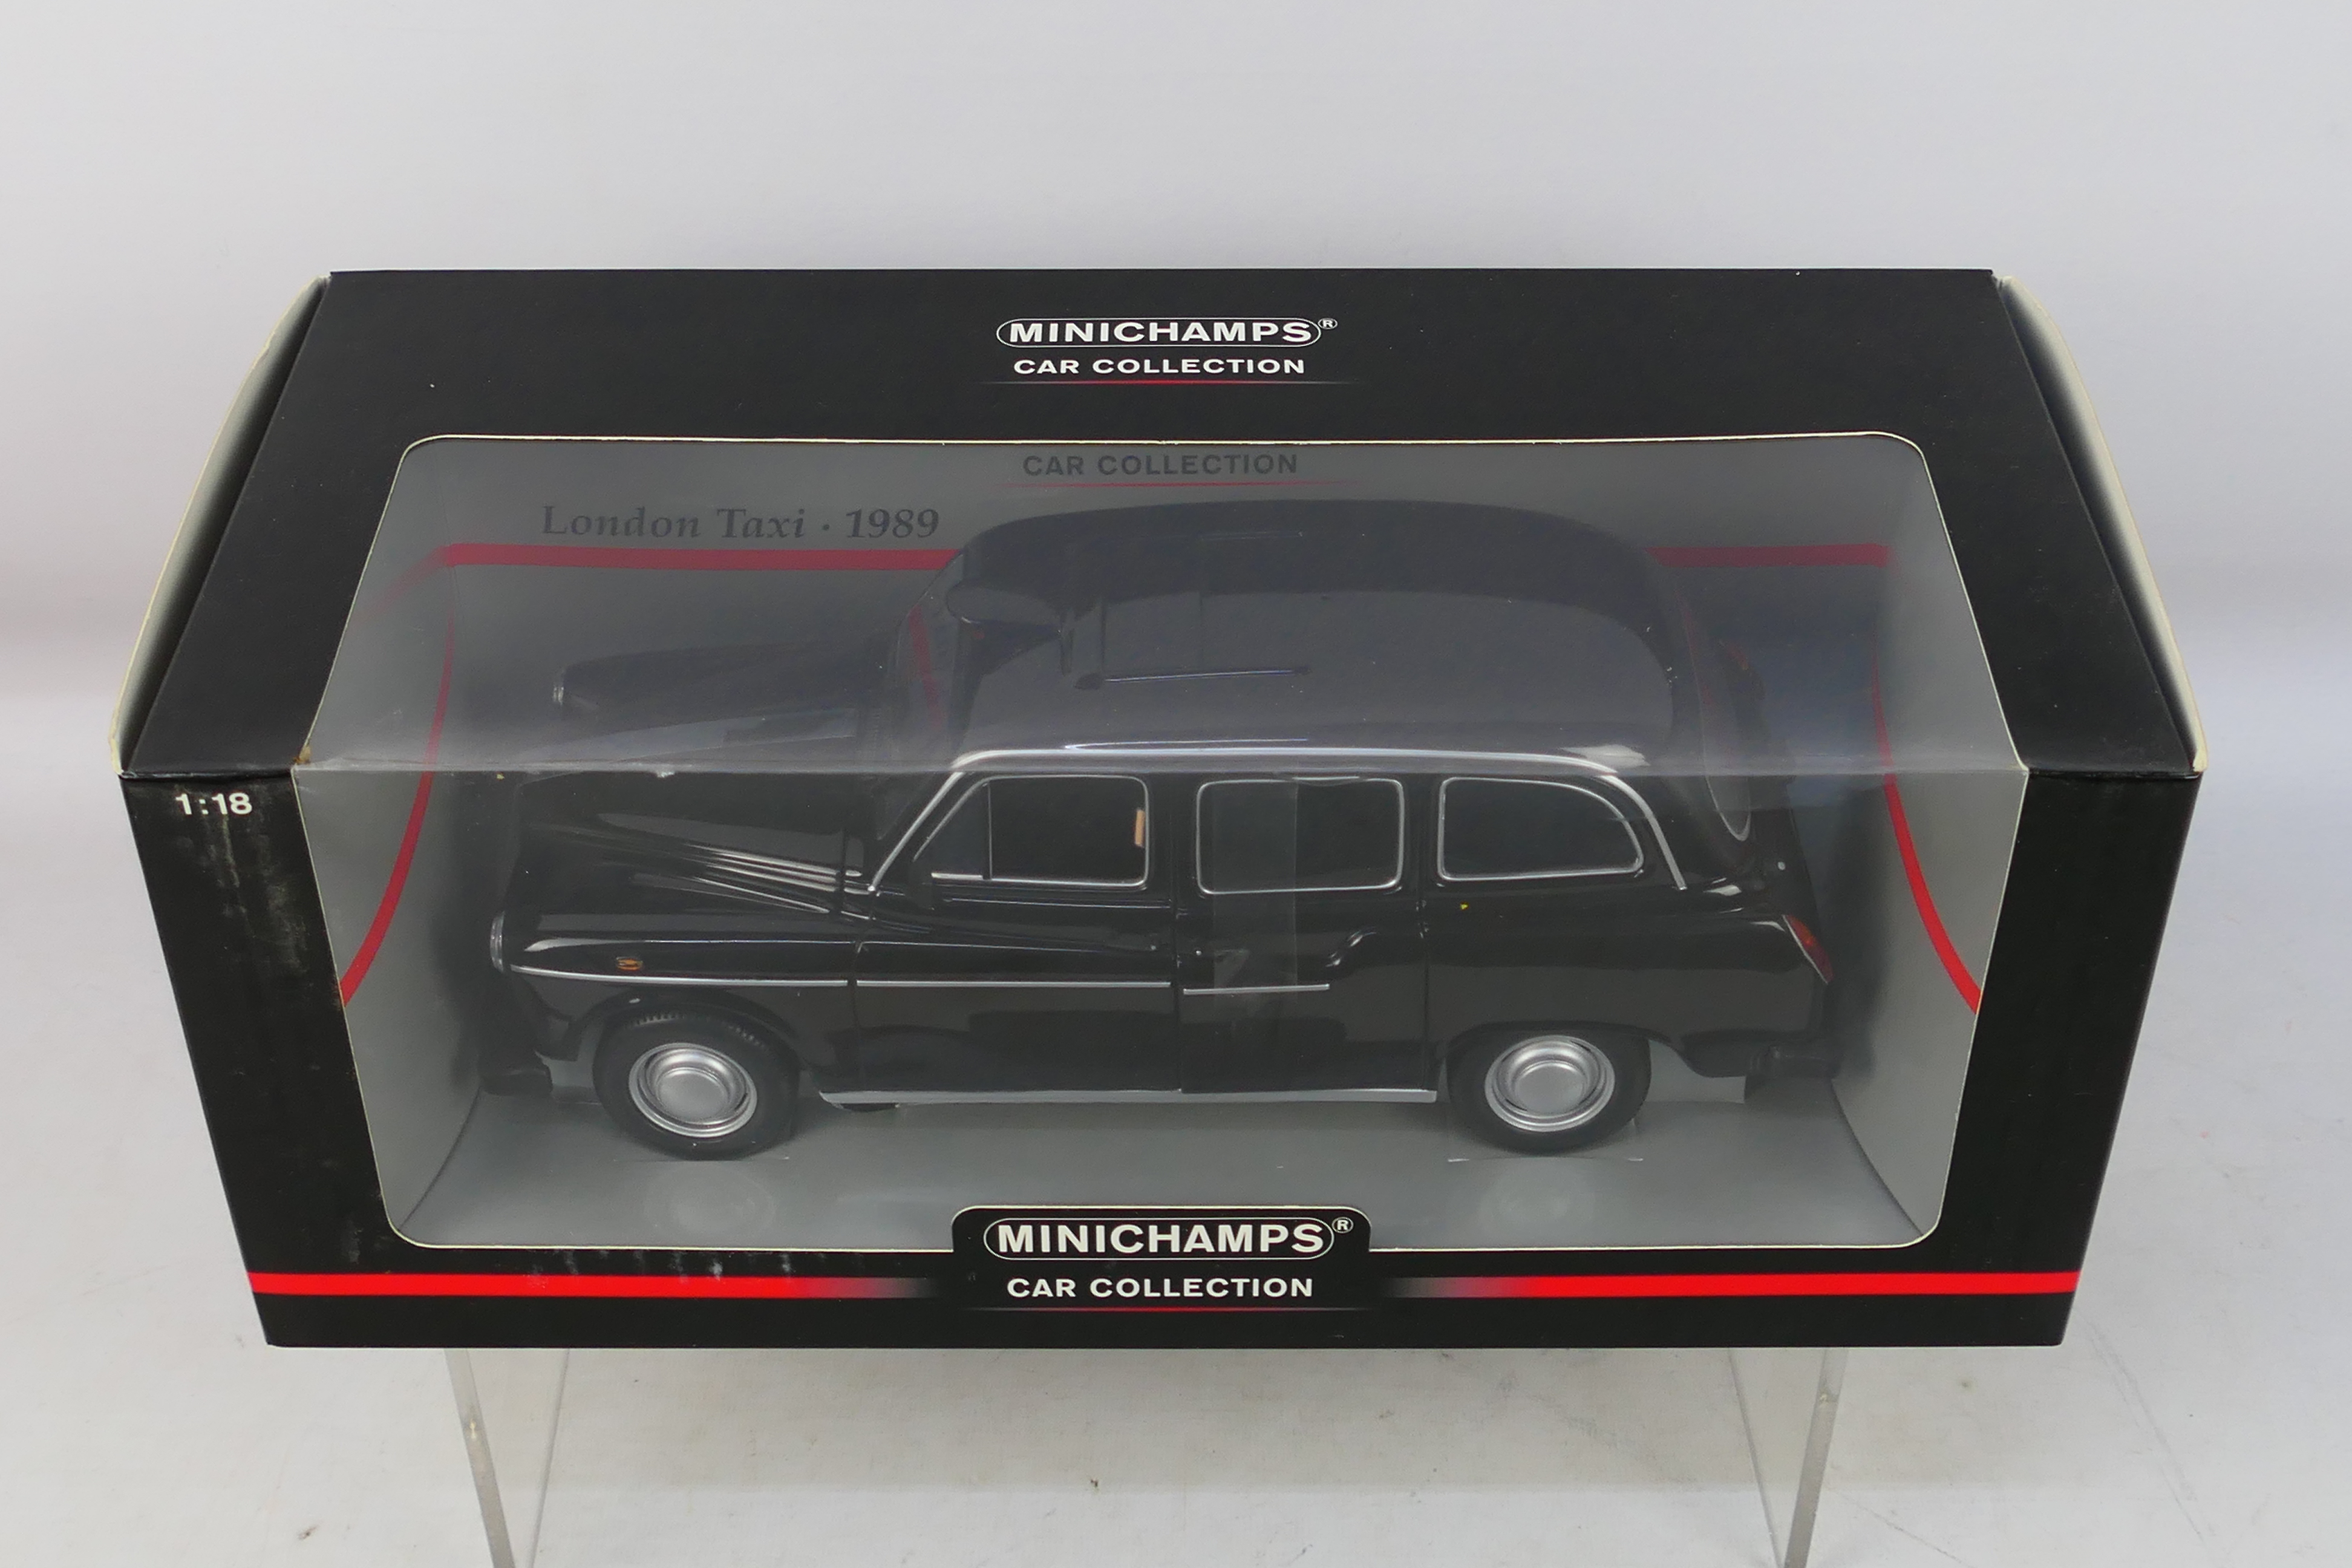 Minichamps - A boxed Minichamps #150136000 'Car Collection' 1:18 scale 1998 London Taxi. - Image 2 of 2